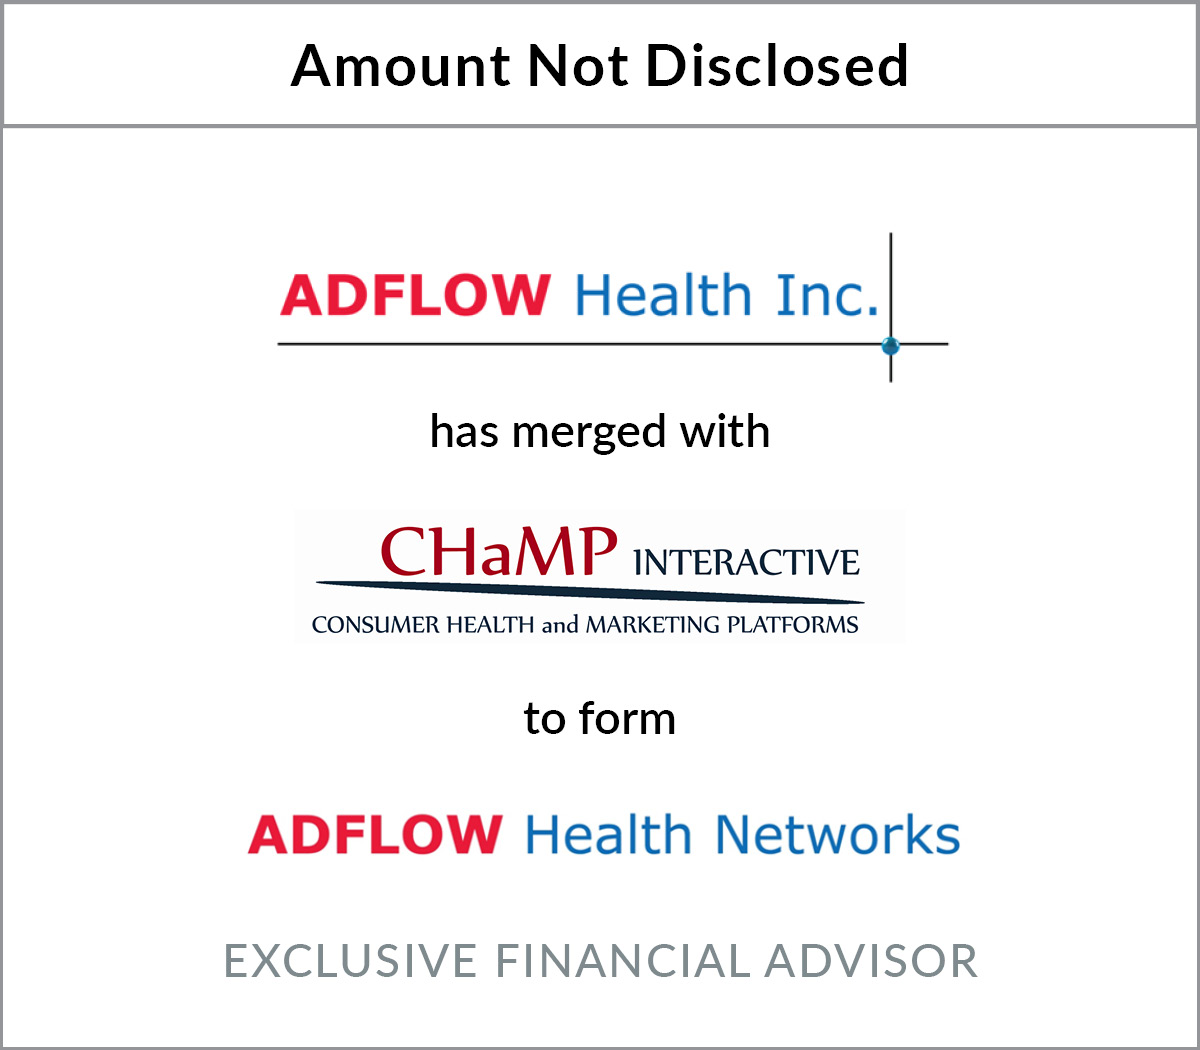 ADFLOW Health Inc. and CHaMP Interactive combined to form ADFLOW Health Networks